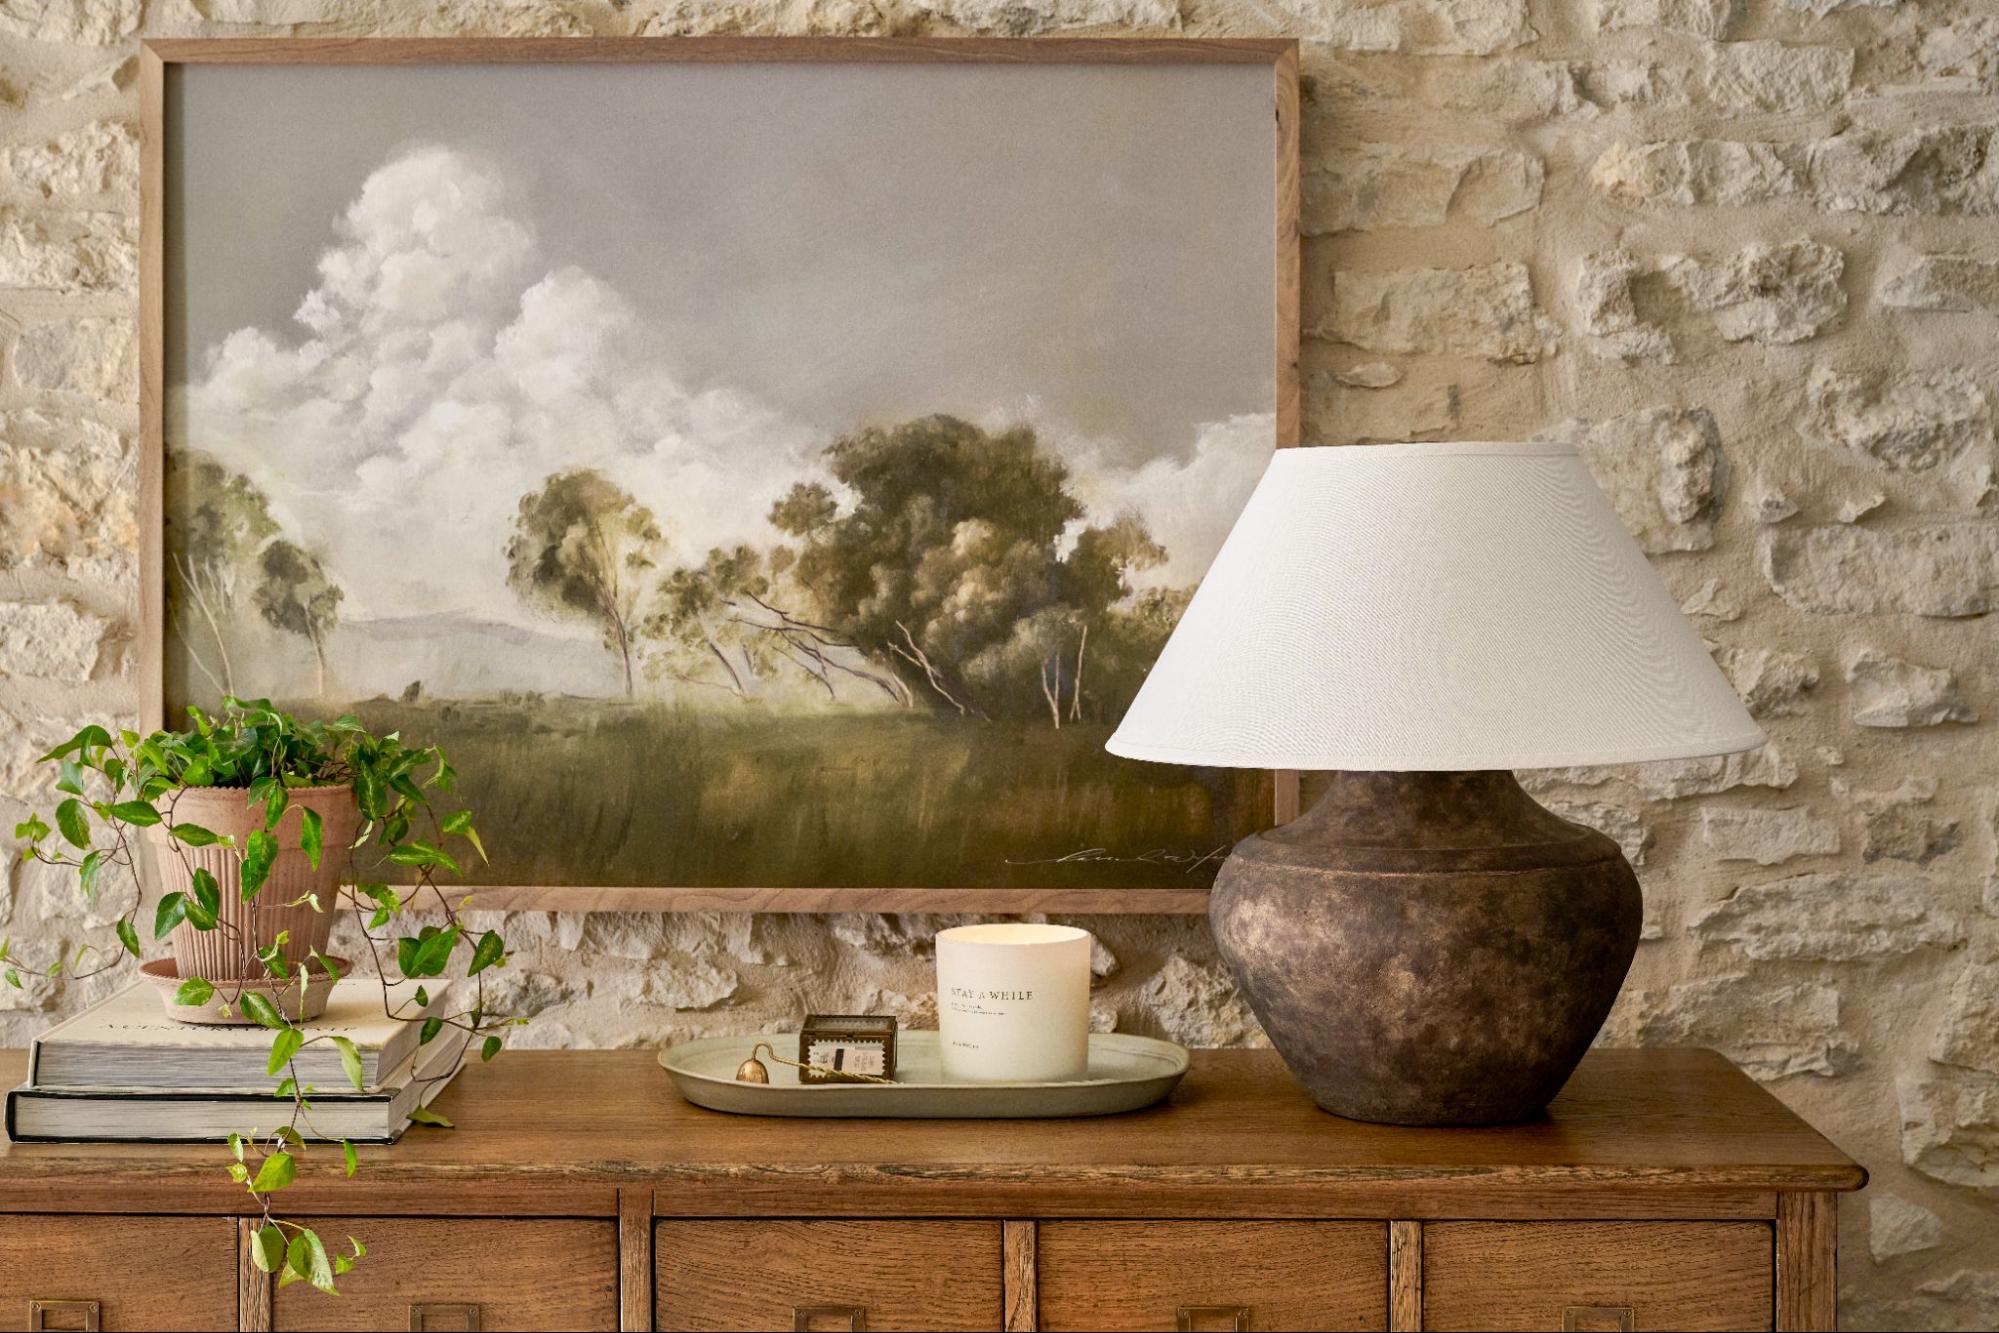 A landscape painting hangs on a stone wall above a styled wooden cabinet. 